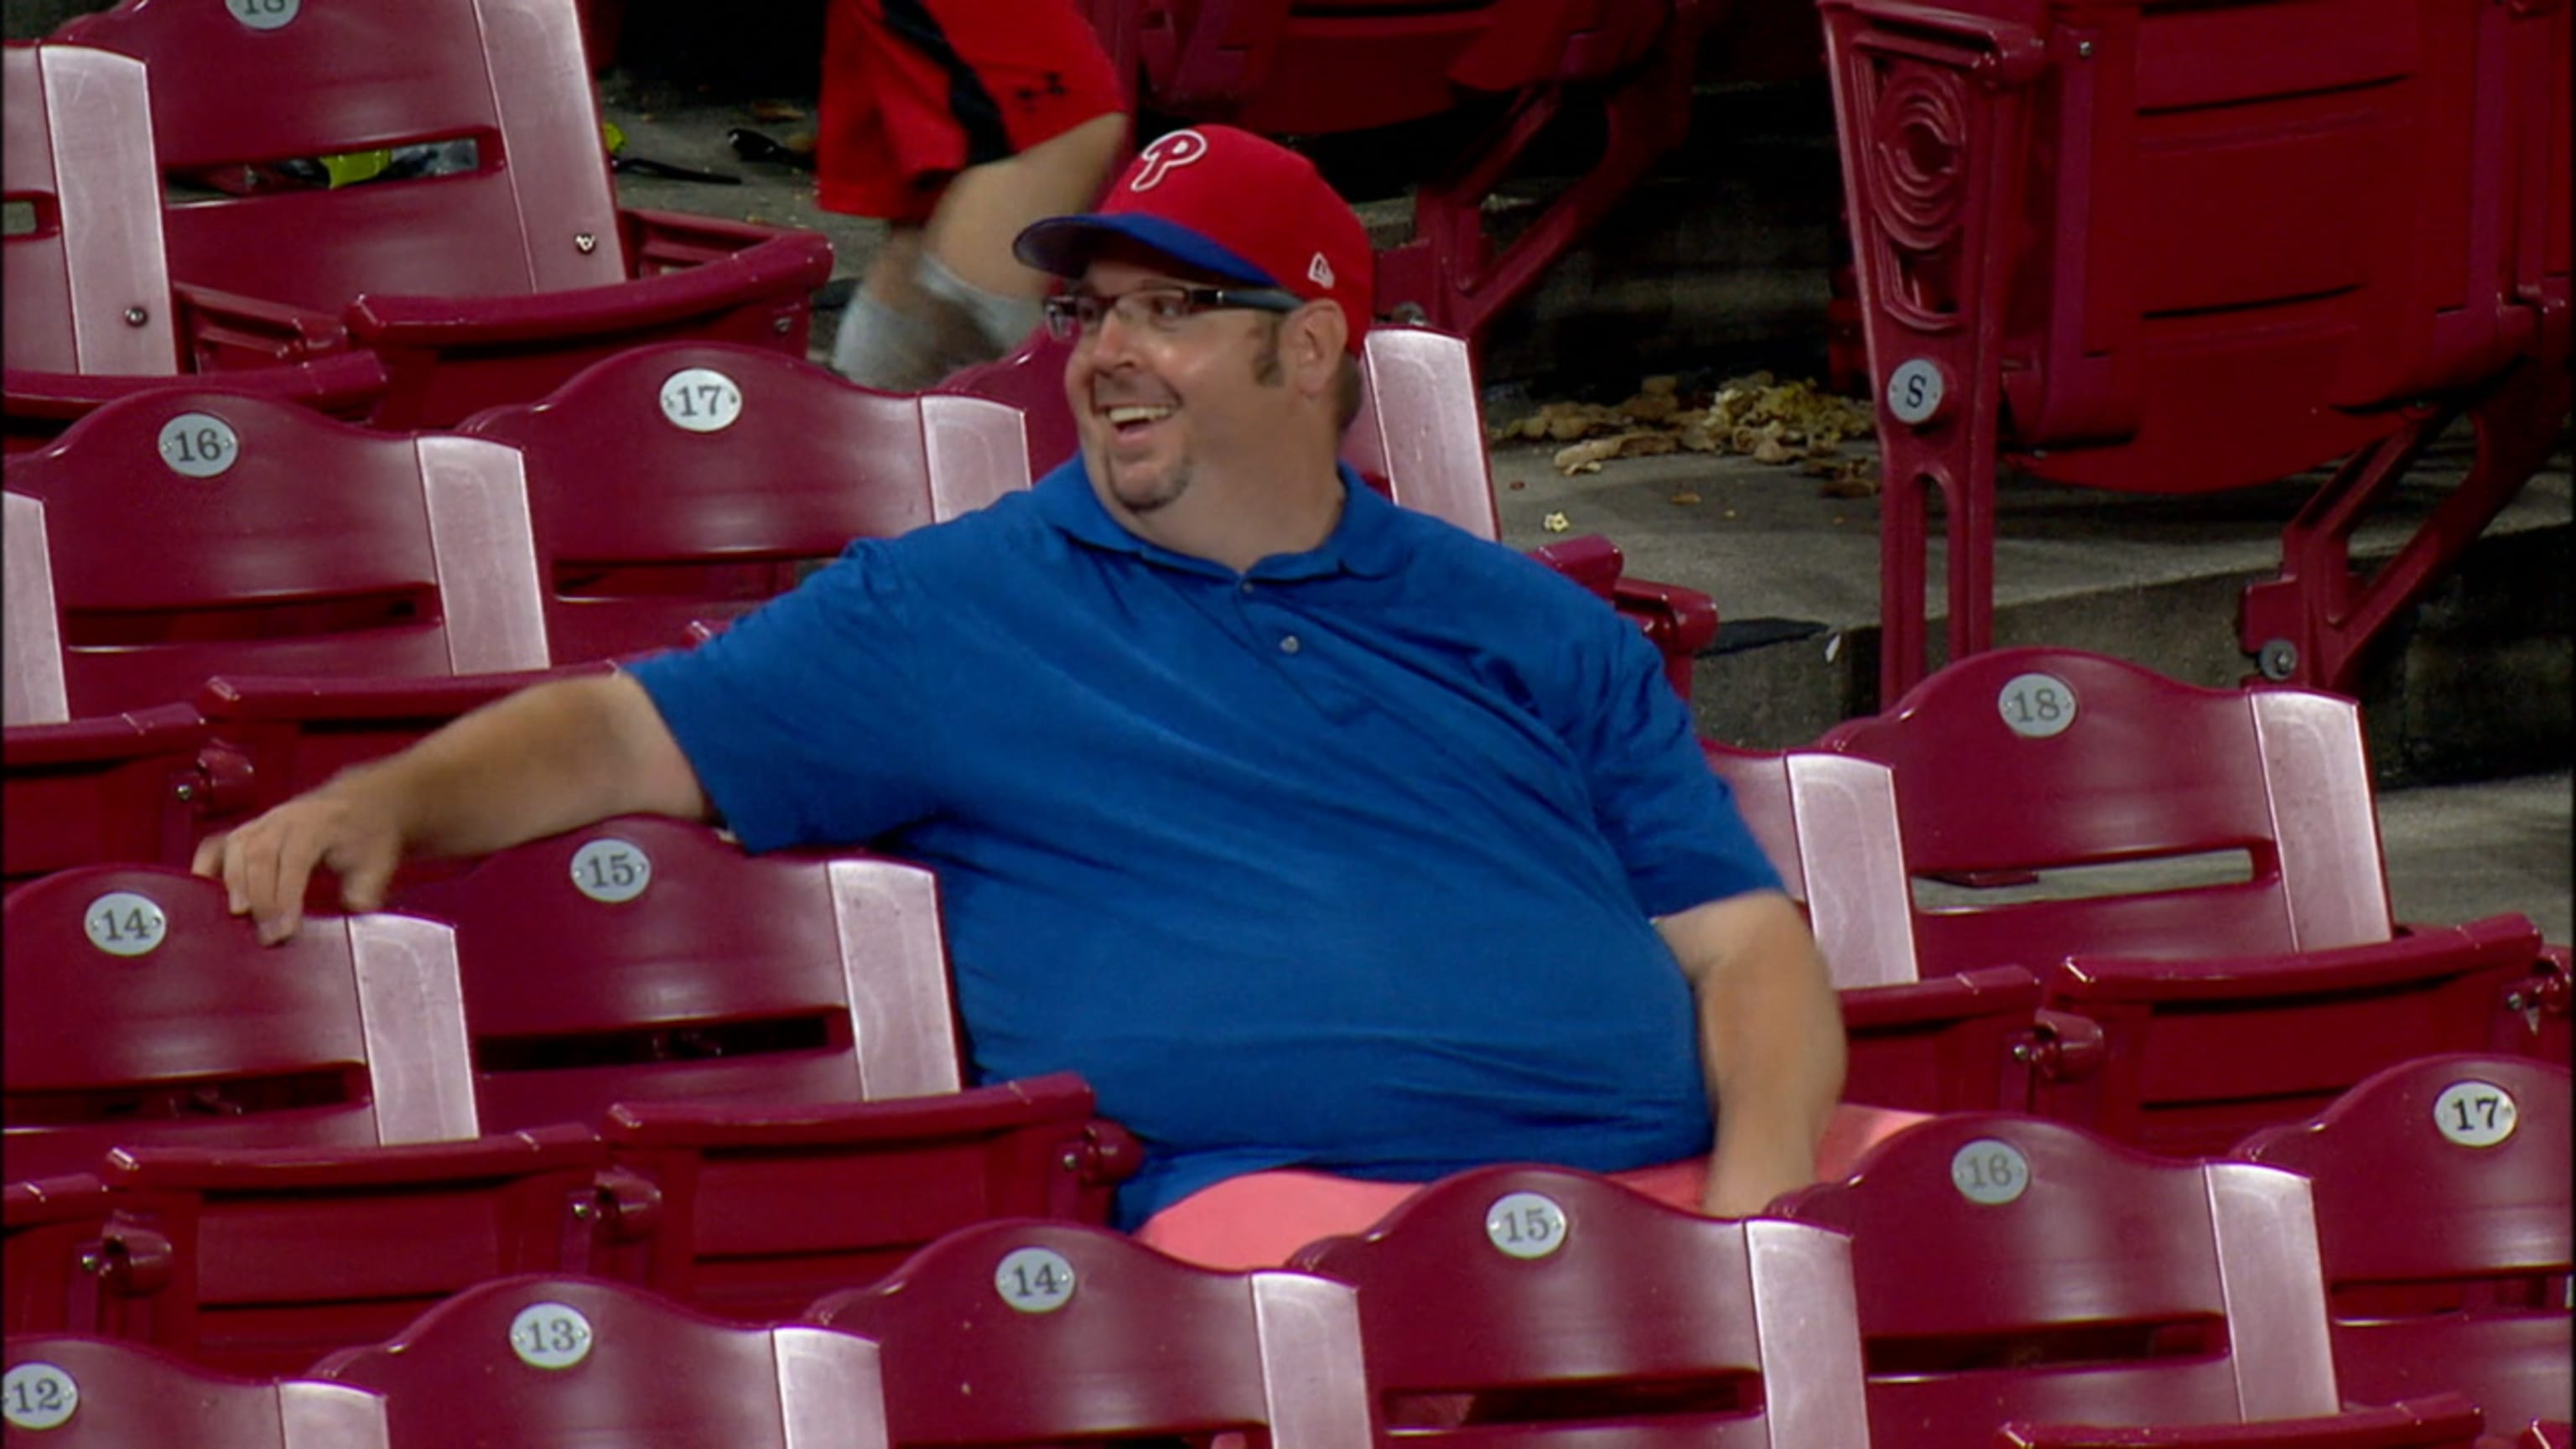 Phillies fan misses catching a baseball twice